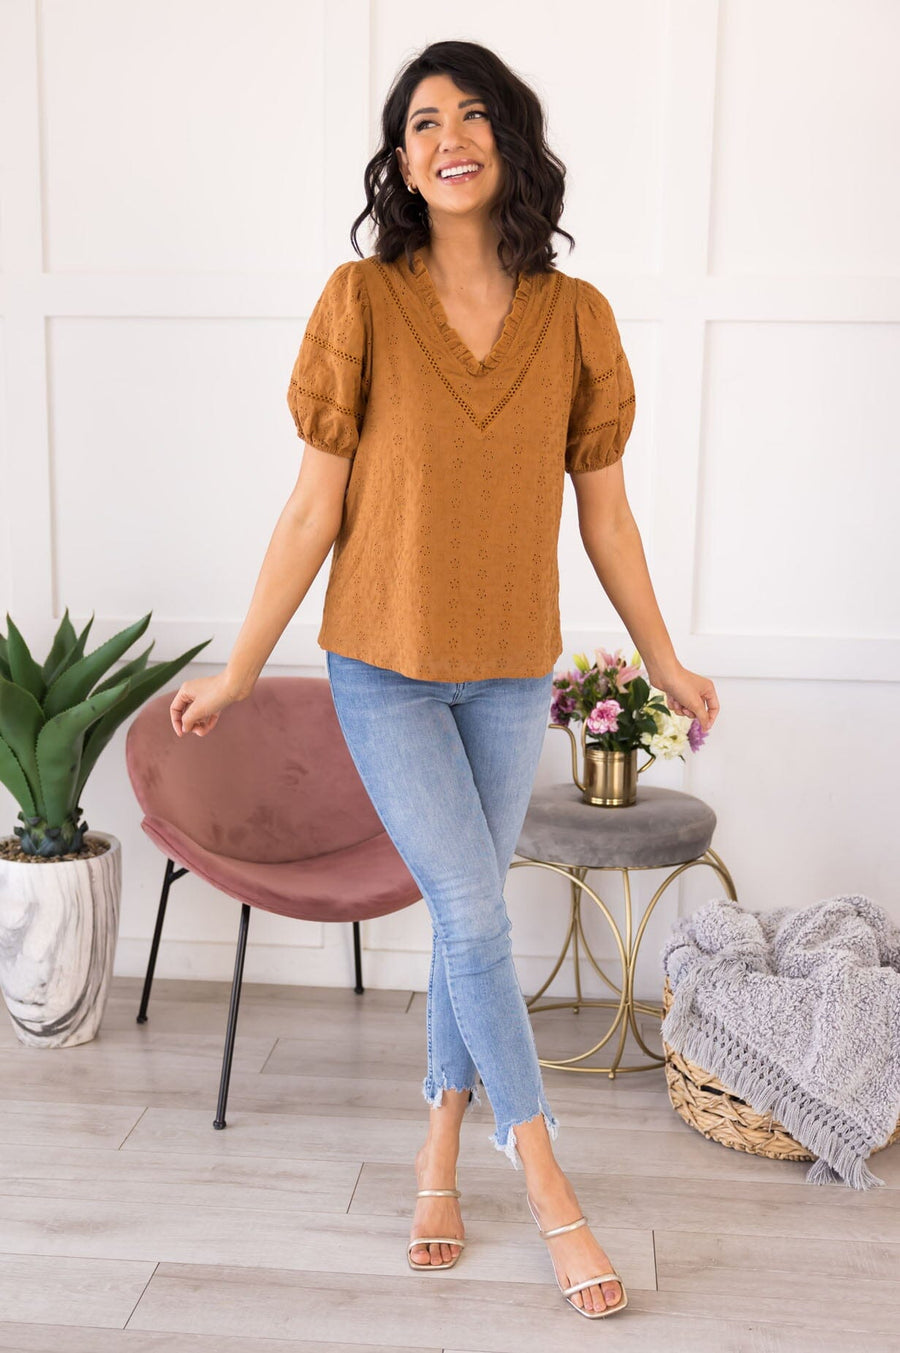 Looking On The Bright Side Eyelet Blouse